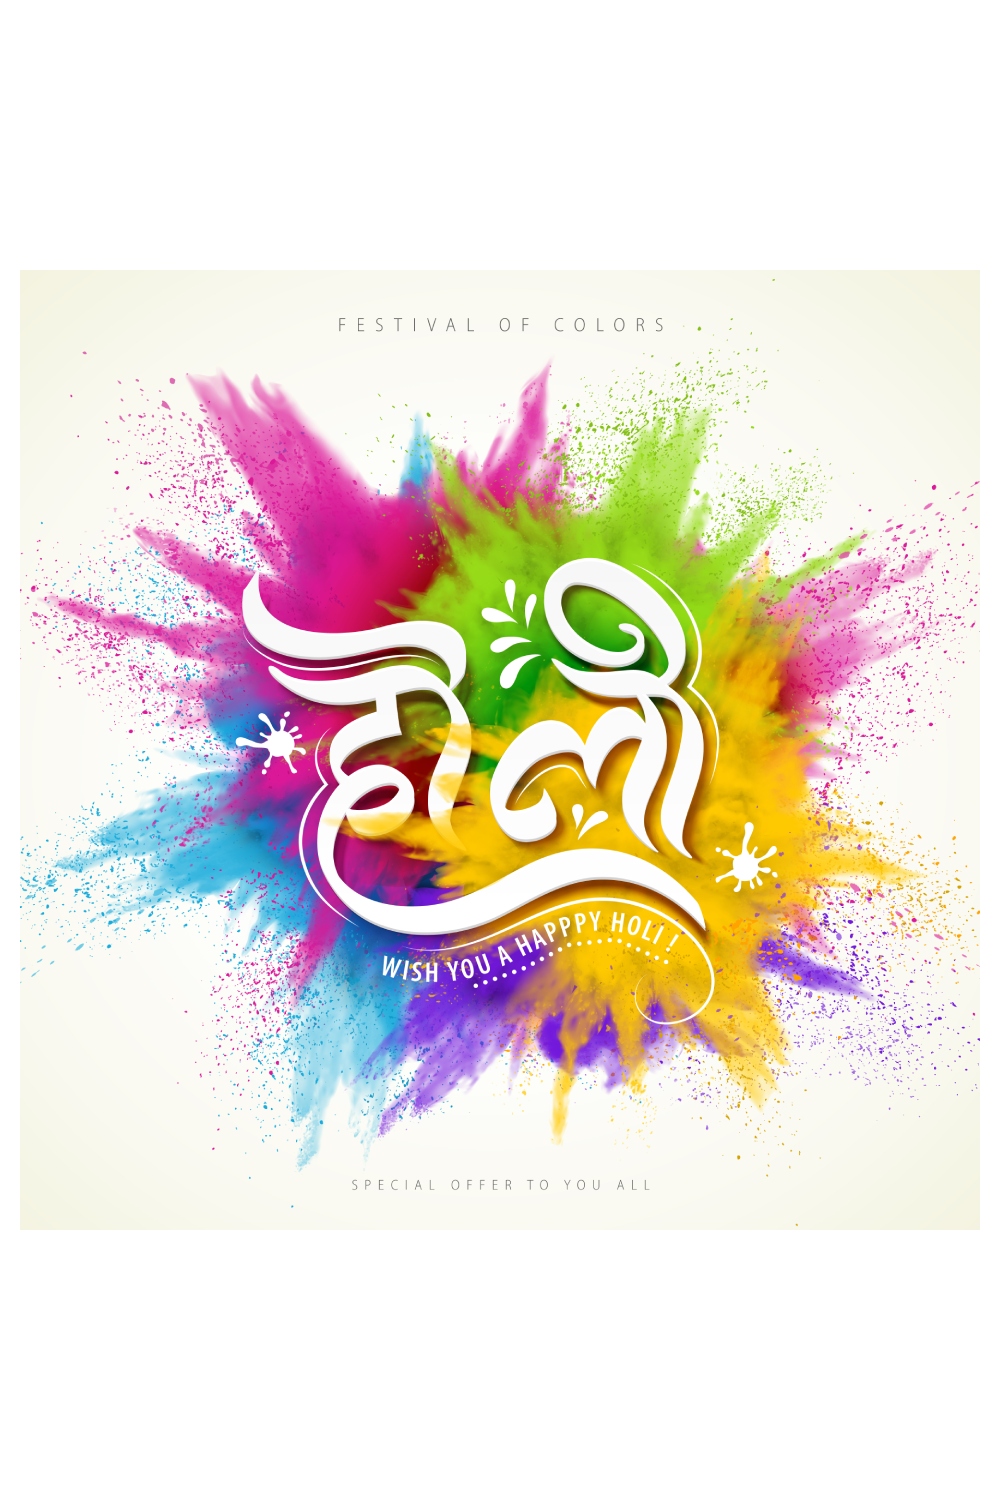 Happy holi festival with colorful powder and calligraphy design pinterest preview image.